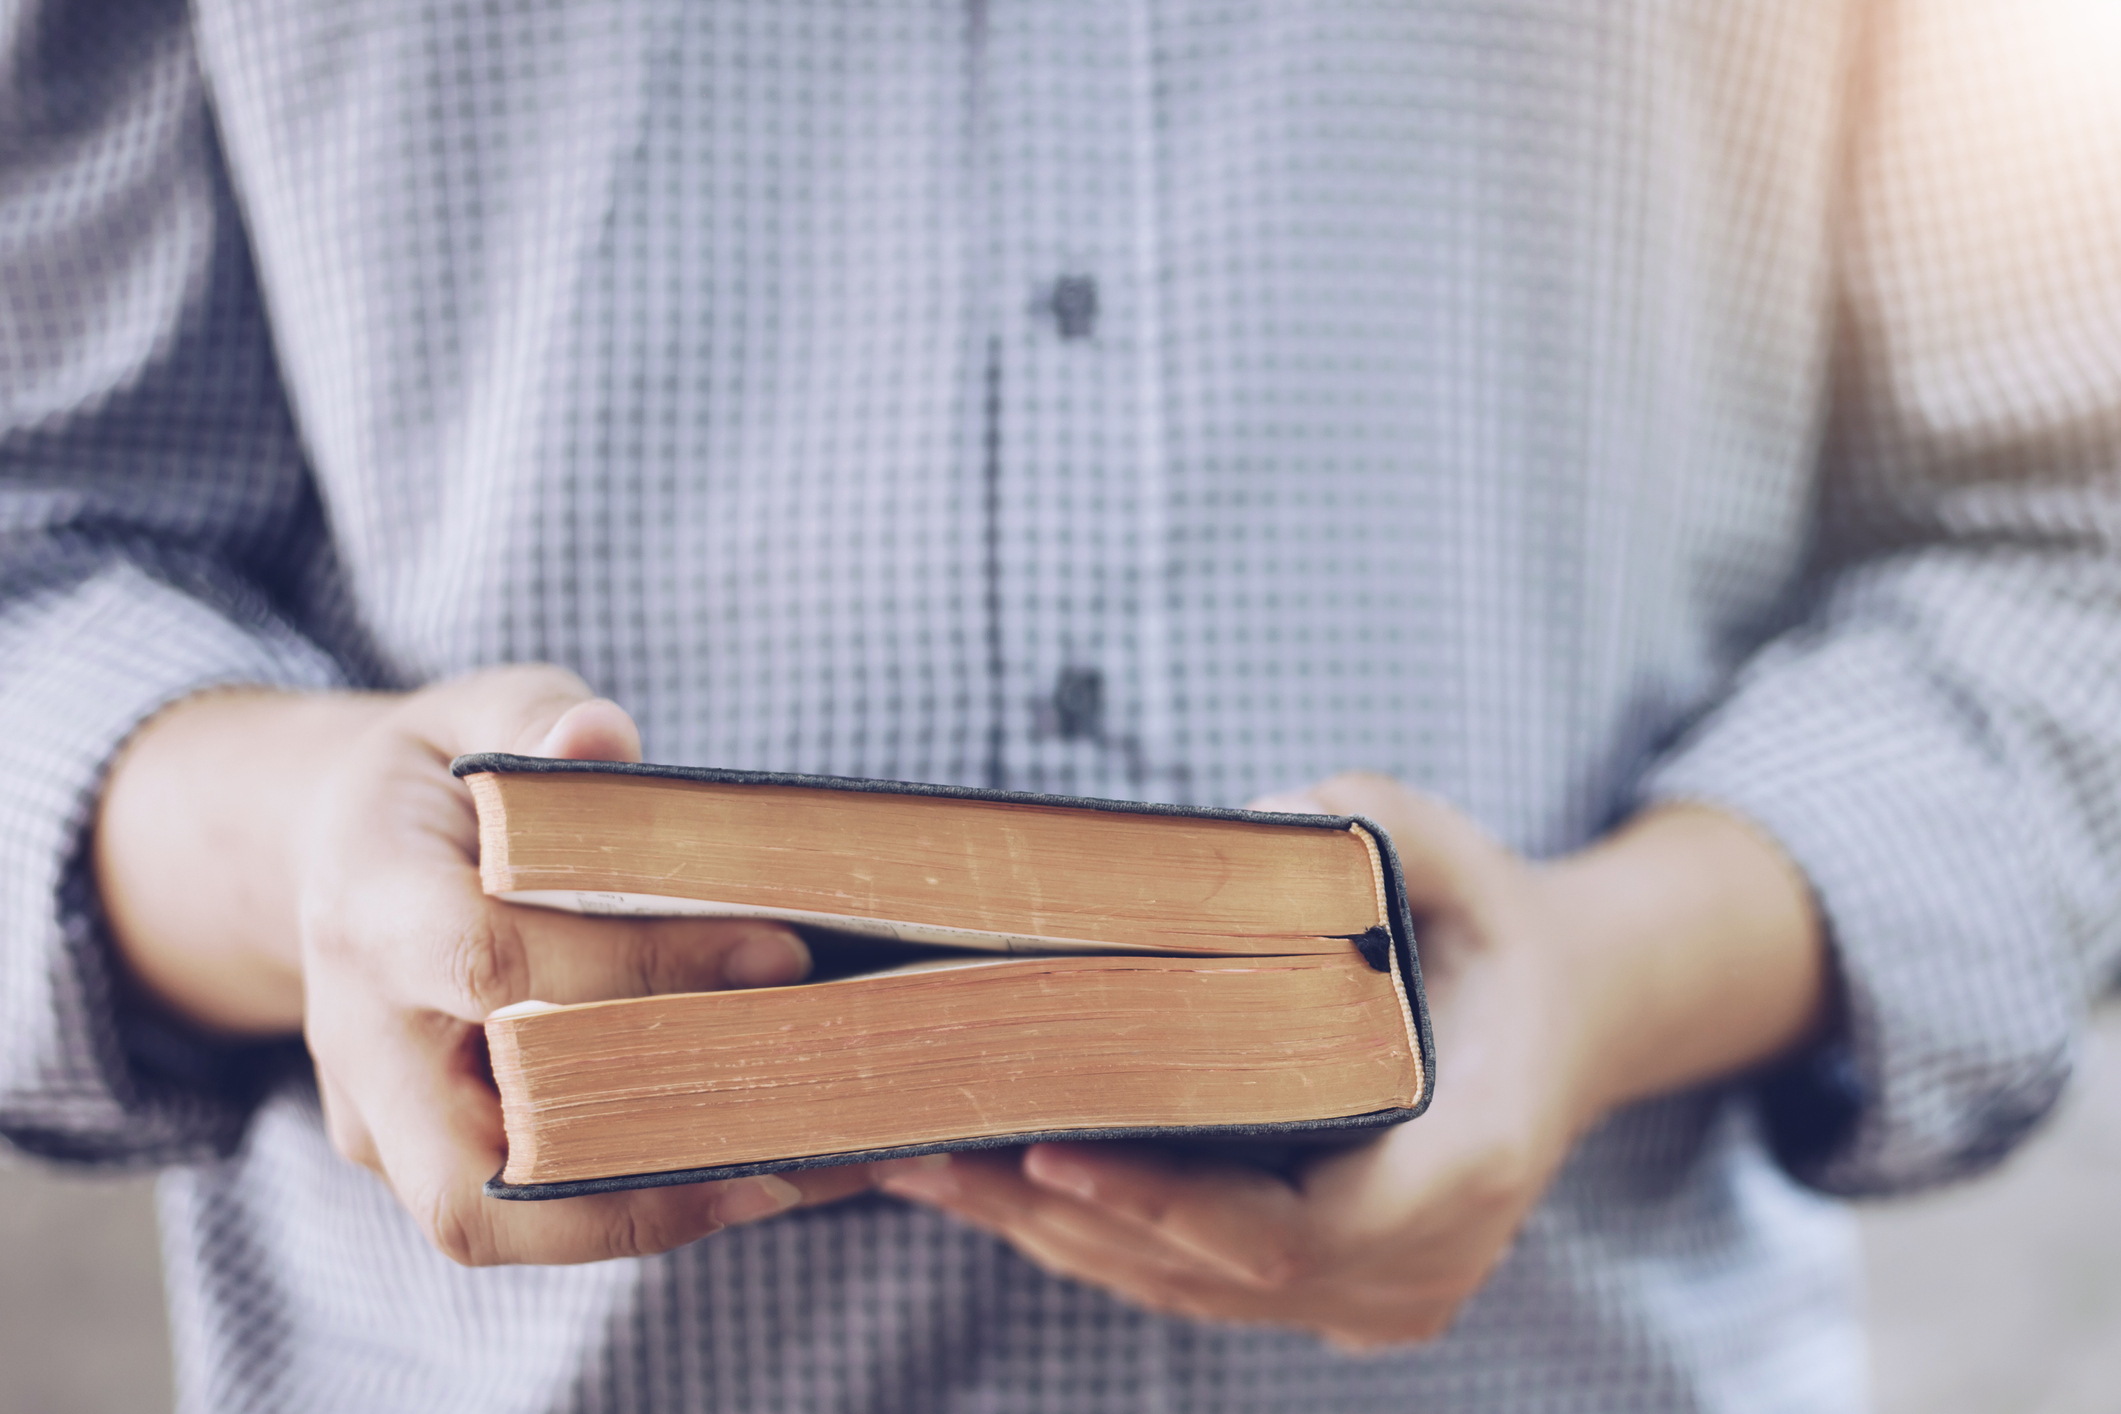 stock photo of man holding Bible with finger holding space in the text